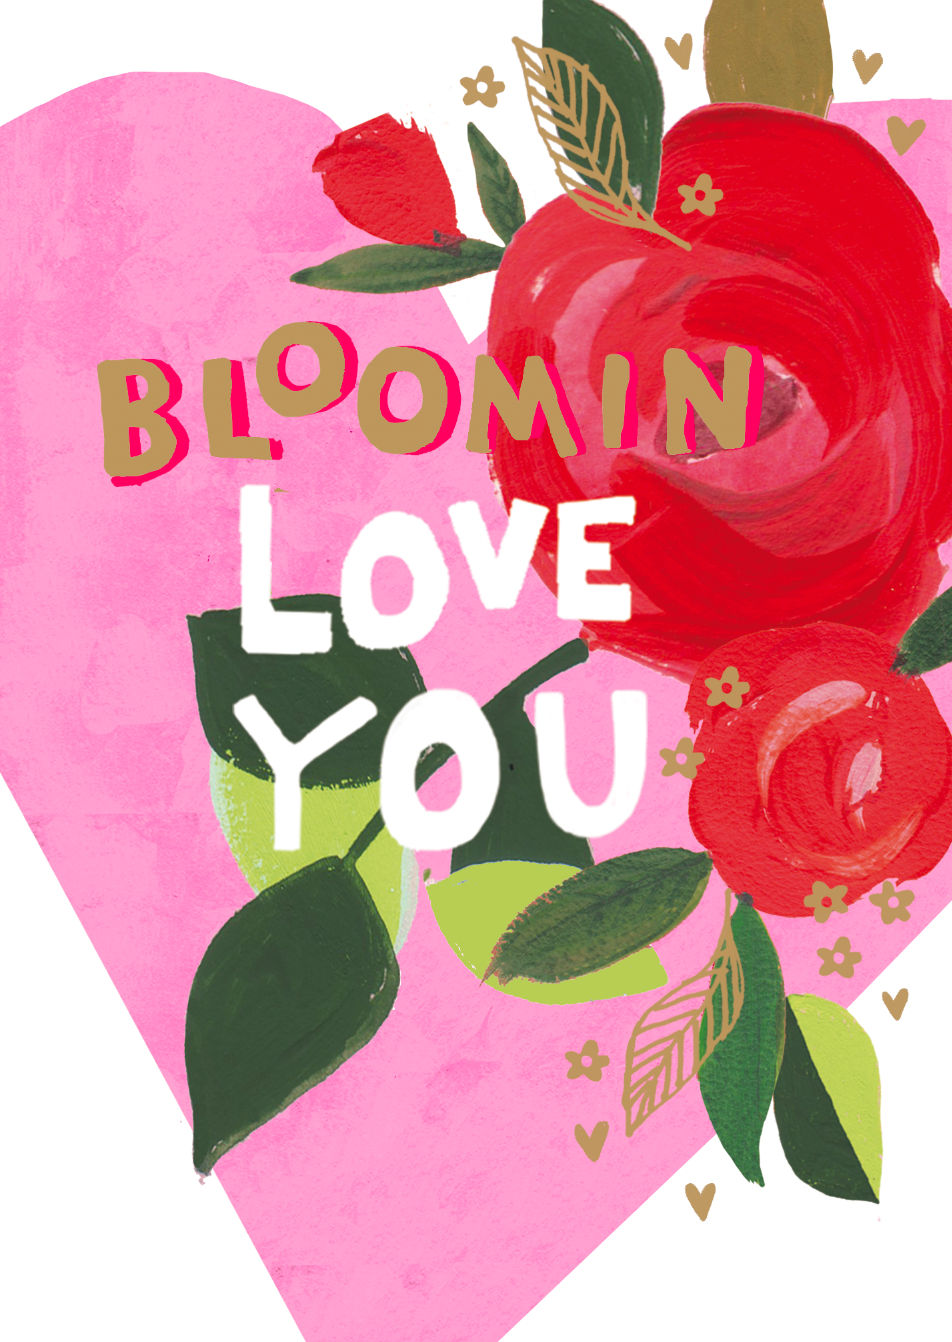 Bloomin Love You Painted Valentine Card by penny black